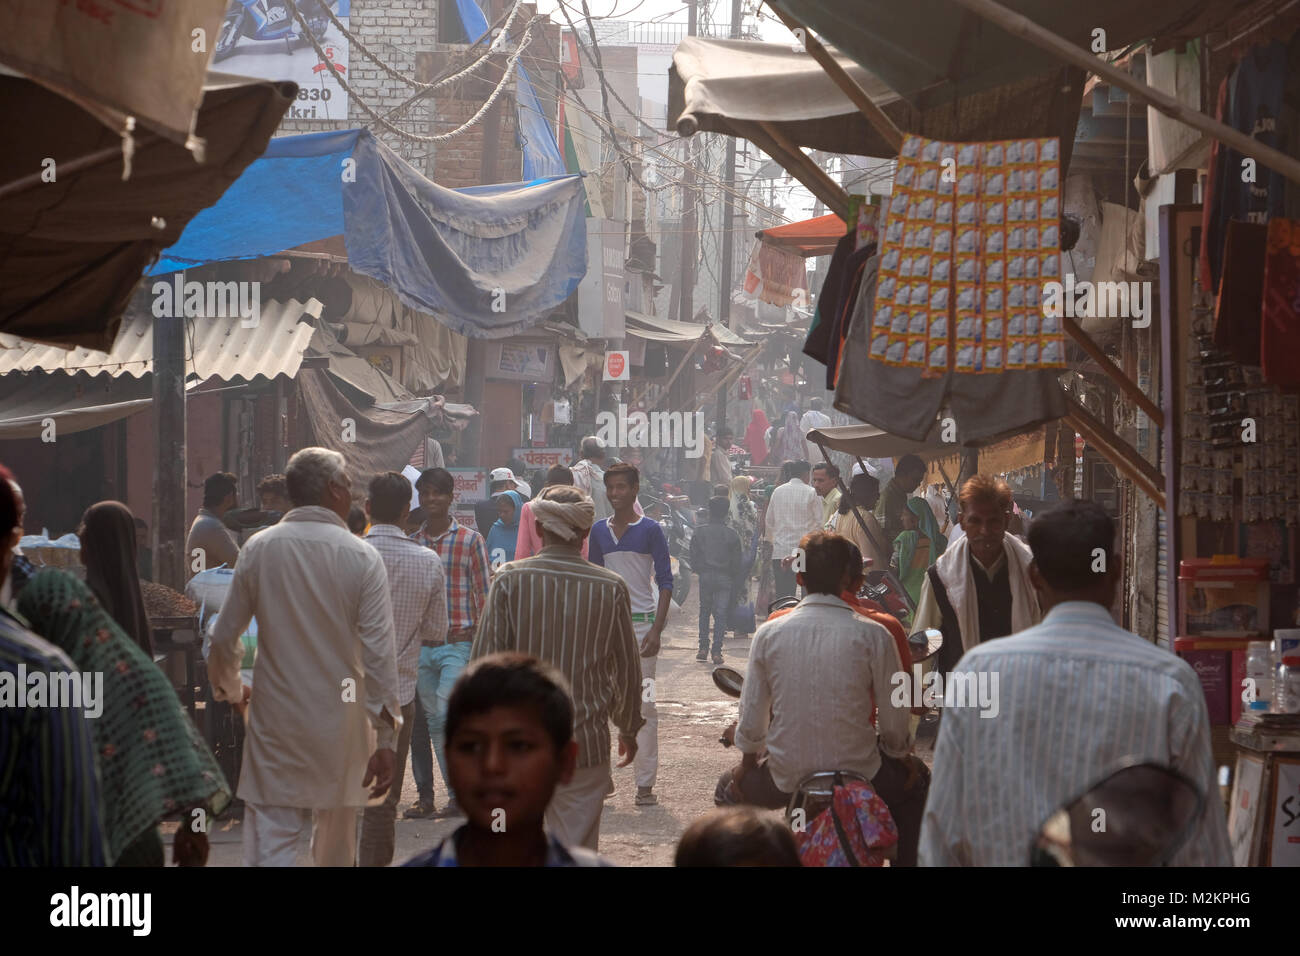 Bustling street scene in the Indian town of Fatehpur Sikri, Stock Photo